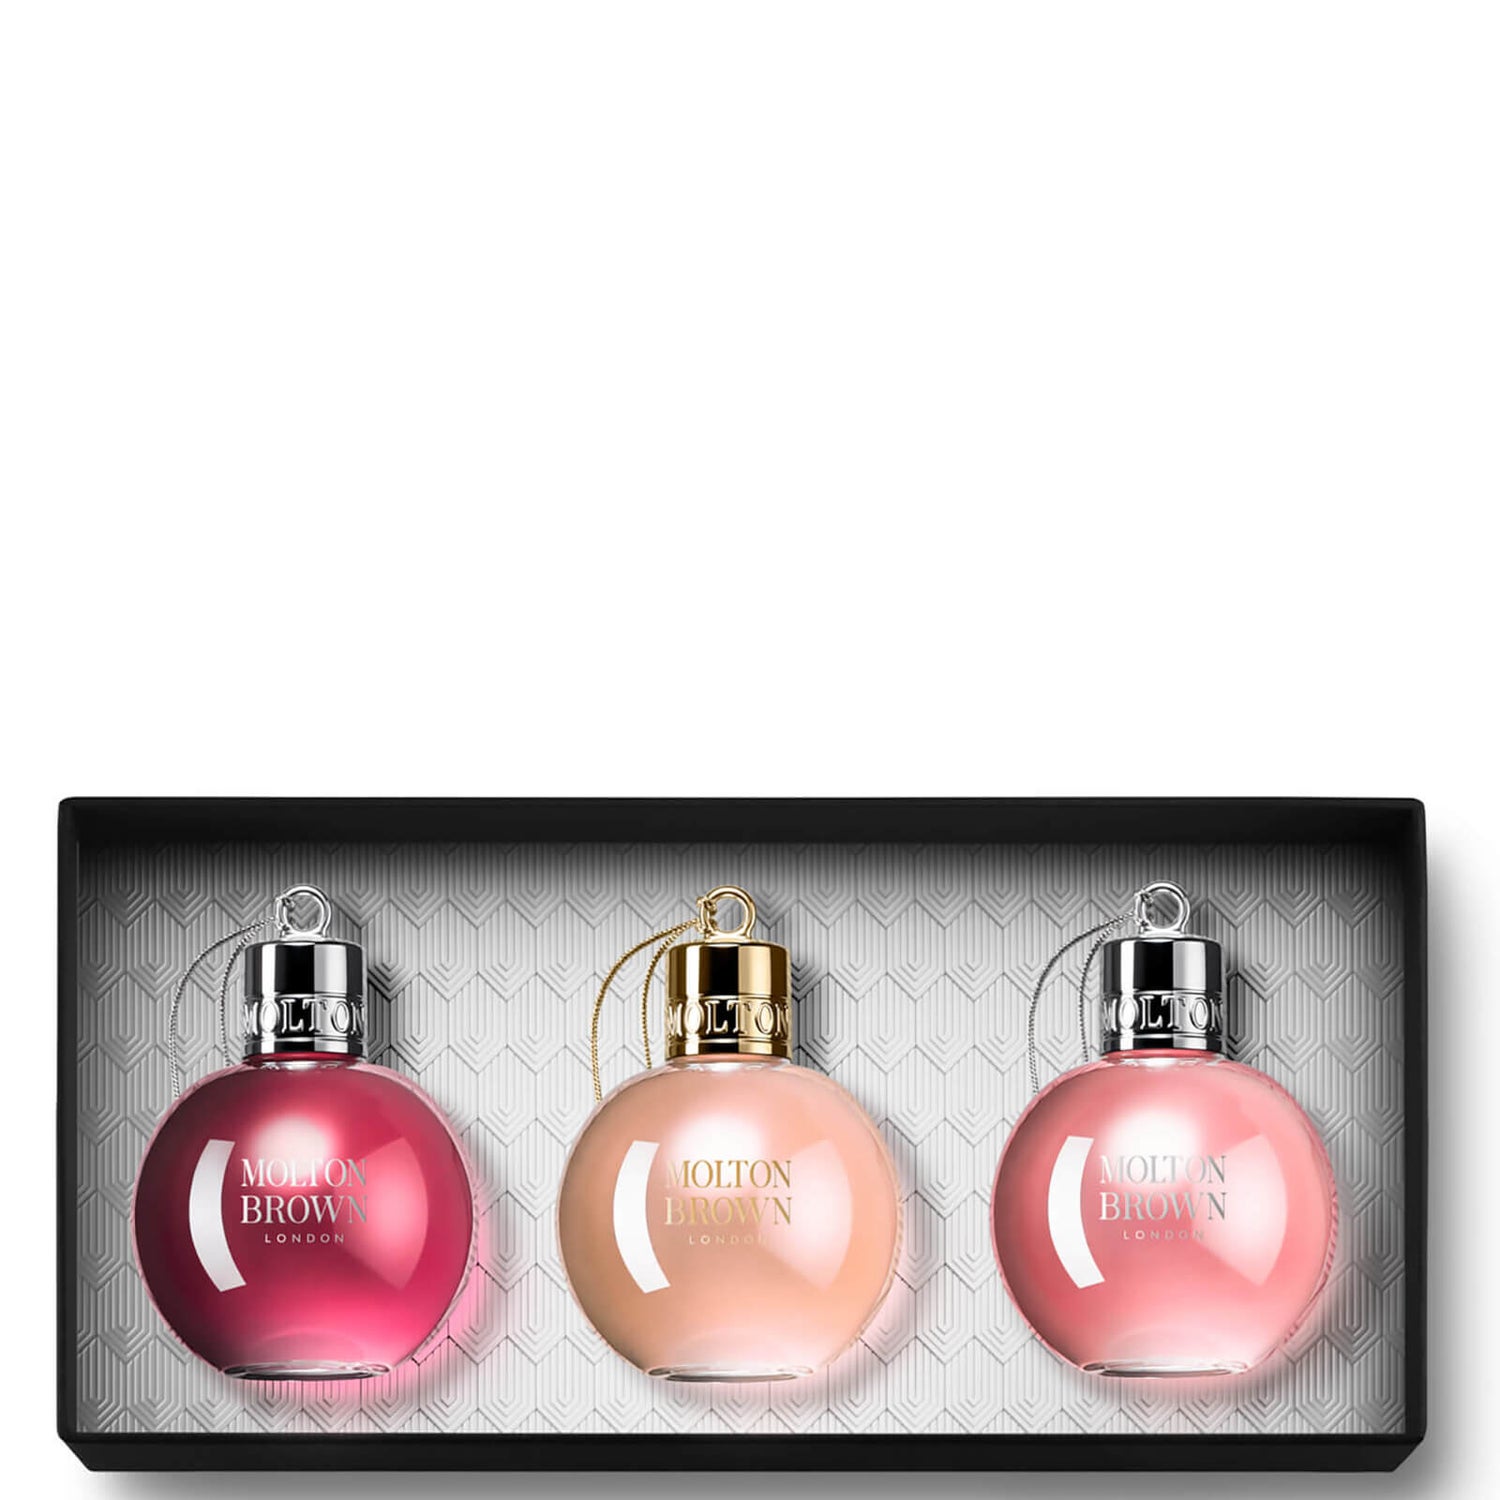 Molton Brown Festive Bauble Gift Set (Worth £36.00)